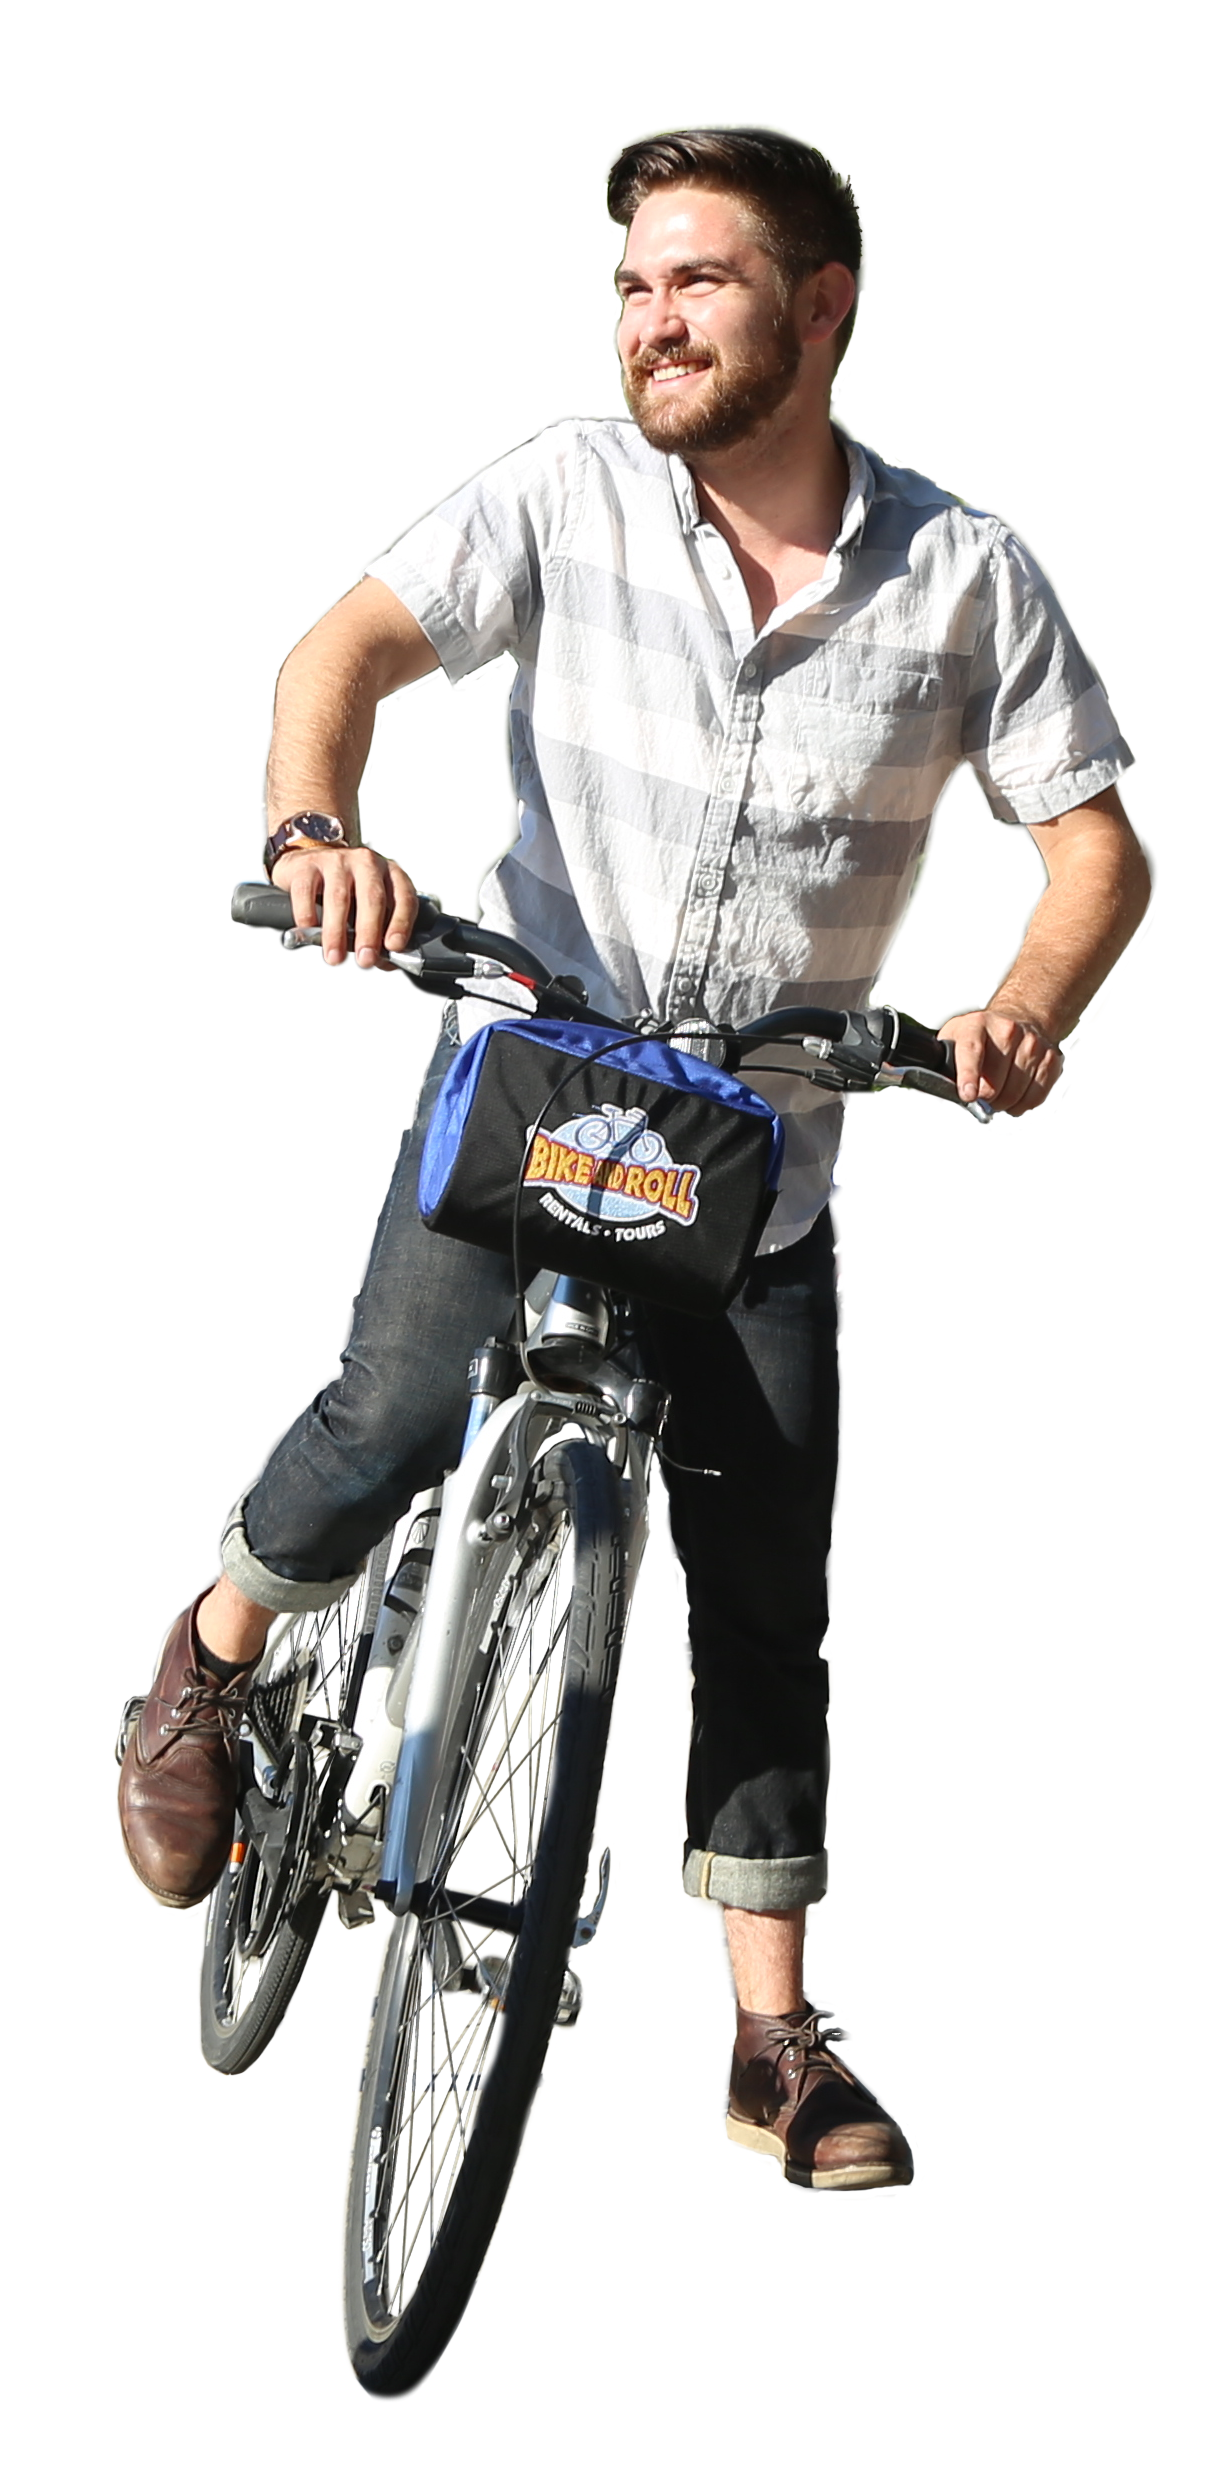 Bike Ride Clipart PNG Image